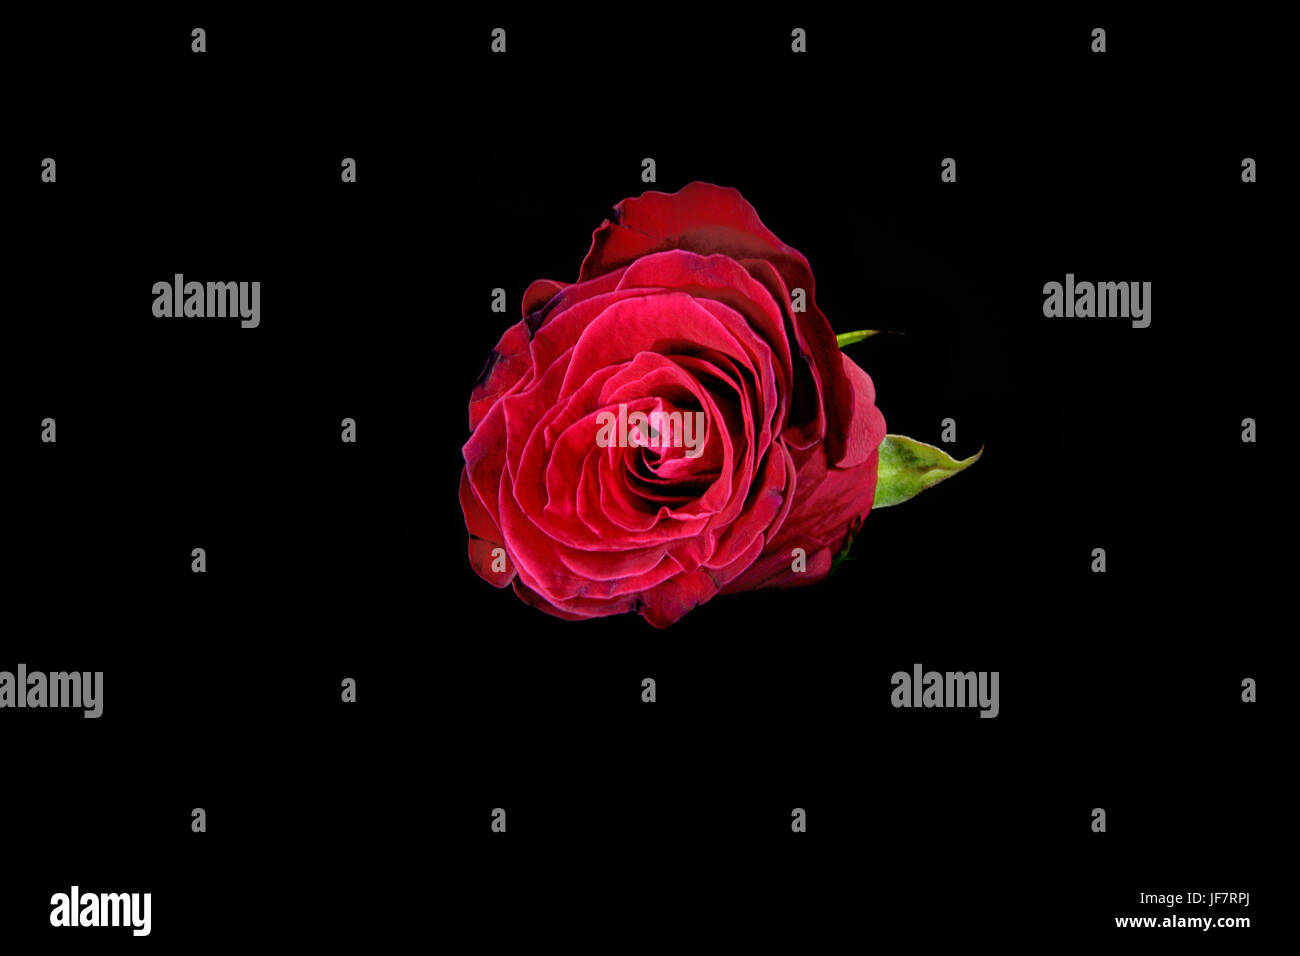 Red rose on a black background Stock Photo